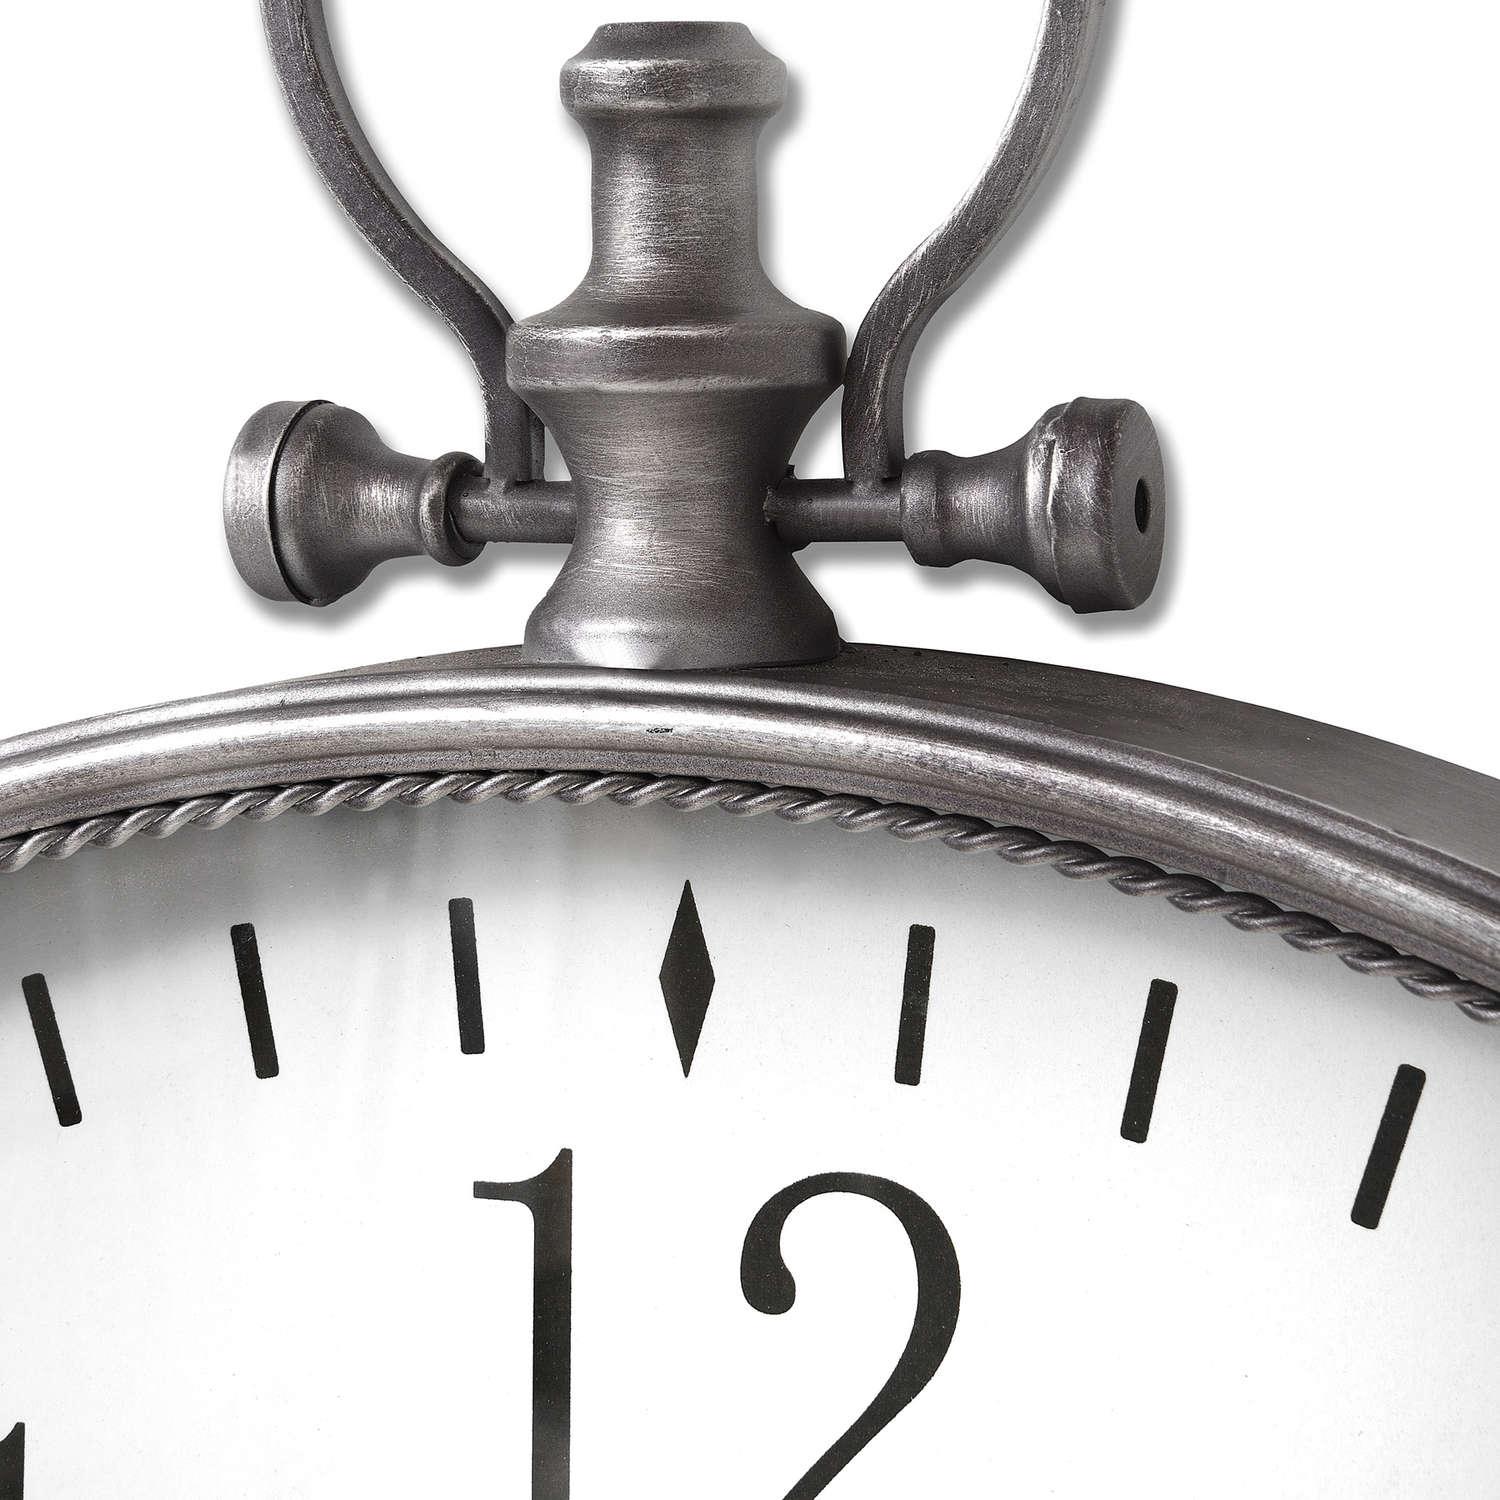 Silver Pocket Watch Wall Clock - Vookoo Lifestyle